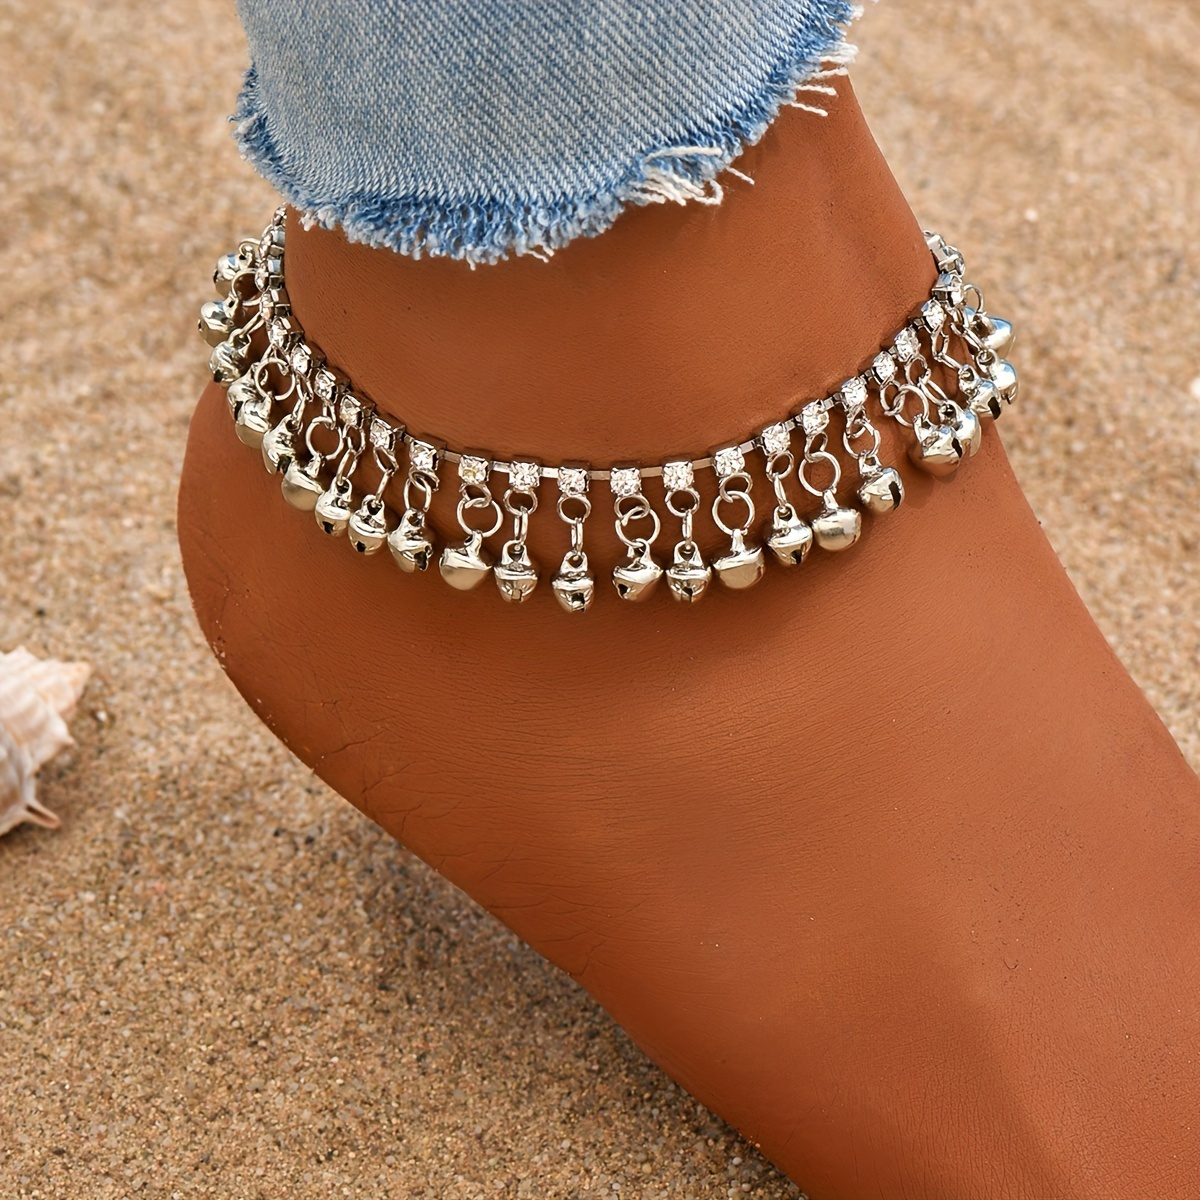 

1 Piece Vintage Style Bell Tassel Charm Anklet Bohemian Style Silver Plated Anklet Perfect Holiday Gift For Beautiful Women